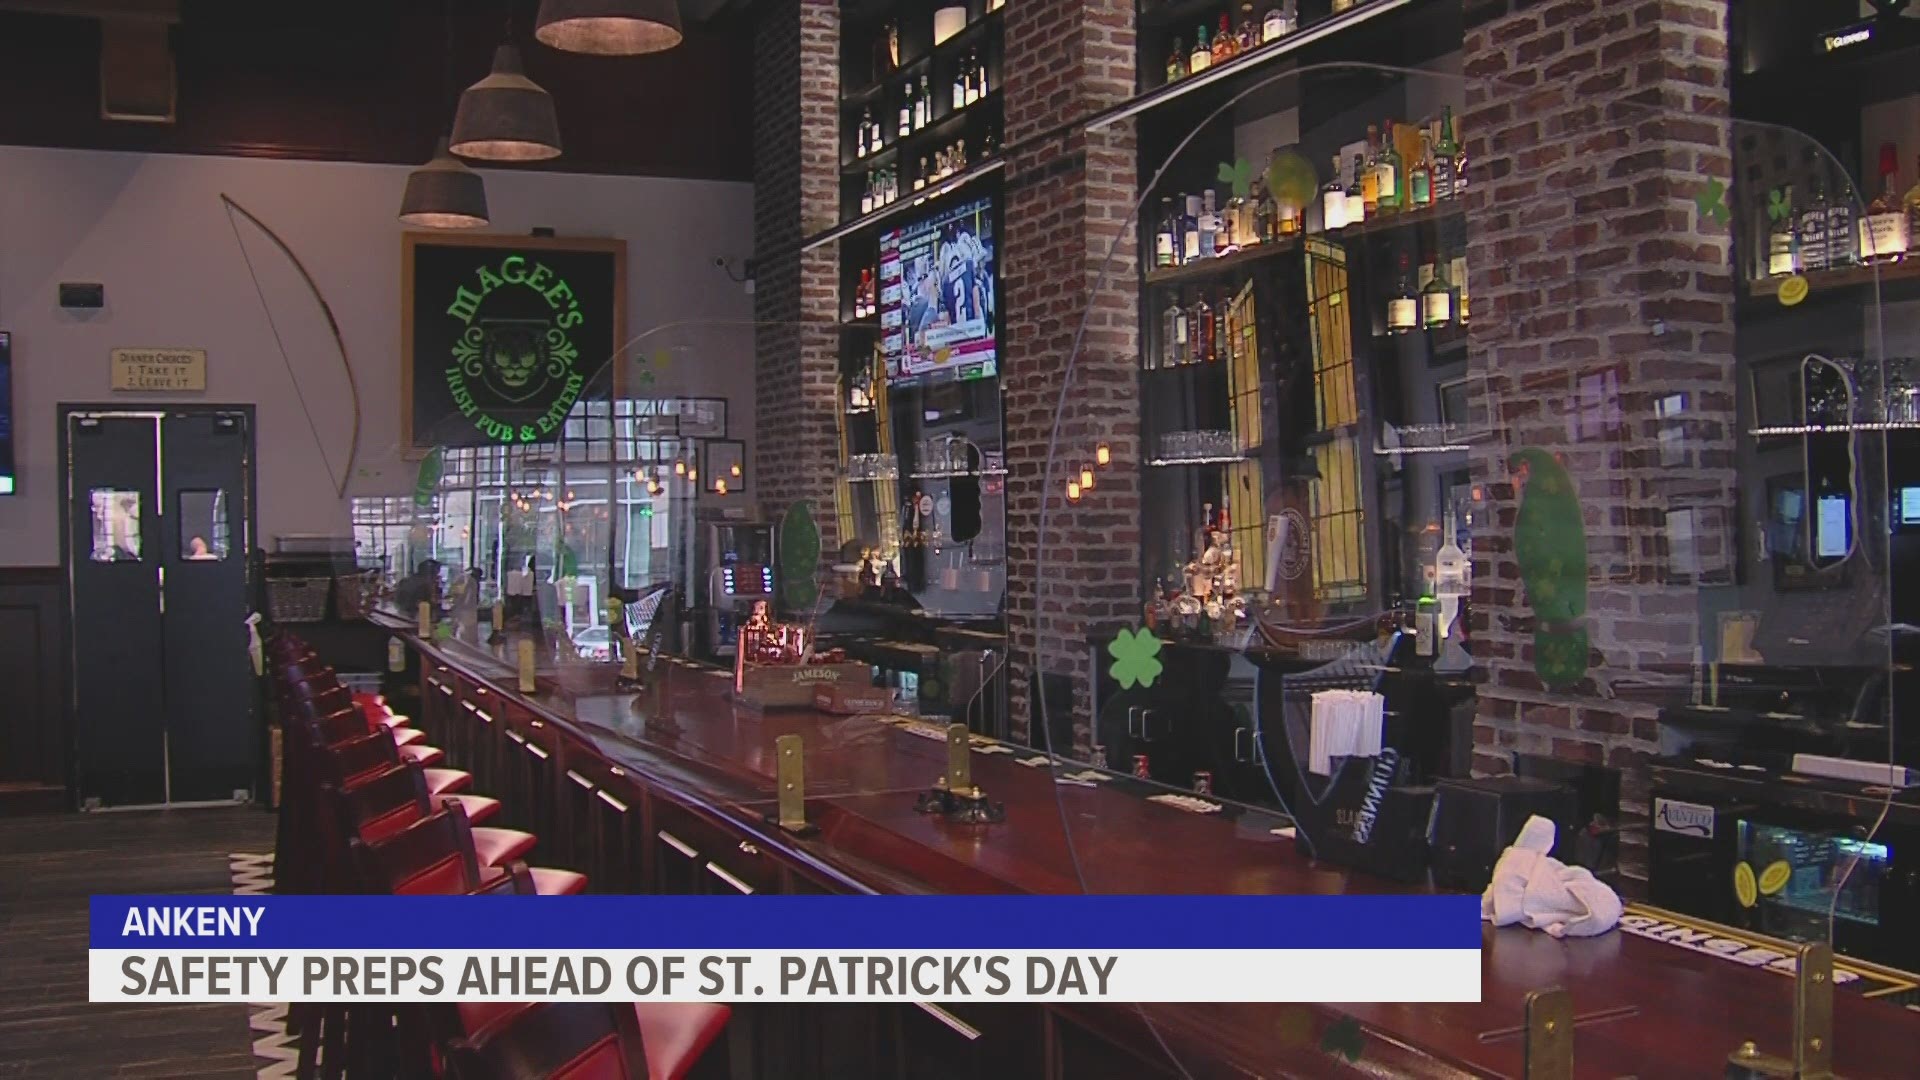 Magee's Irish Pub in Ankeny said masks are still required for patrons this St. Patty's Day.